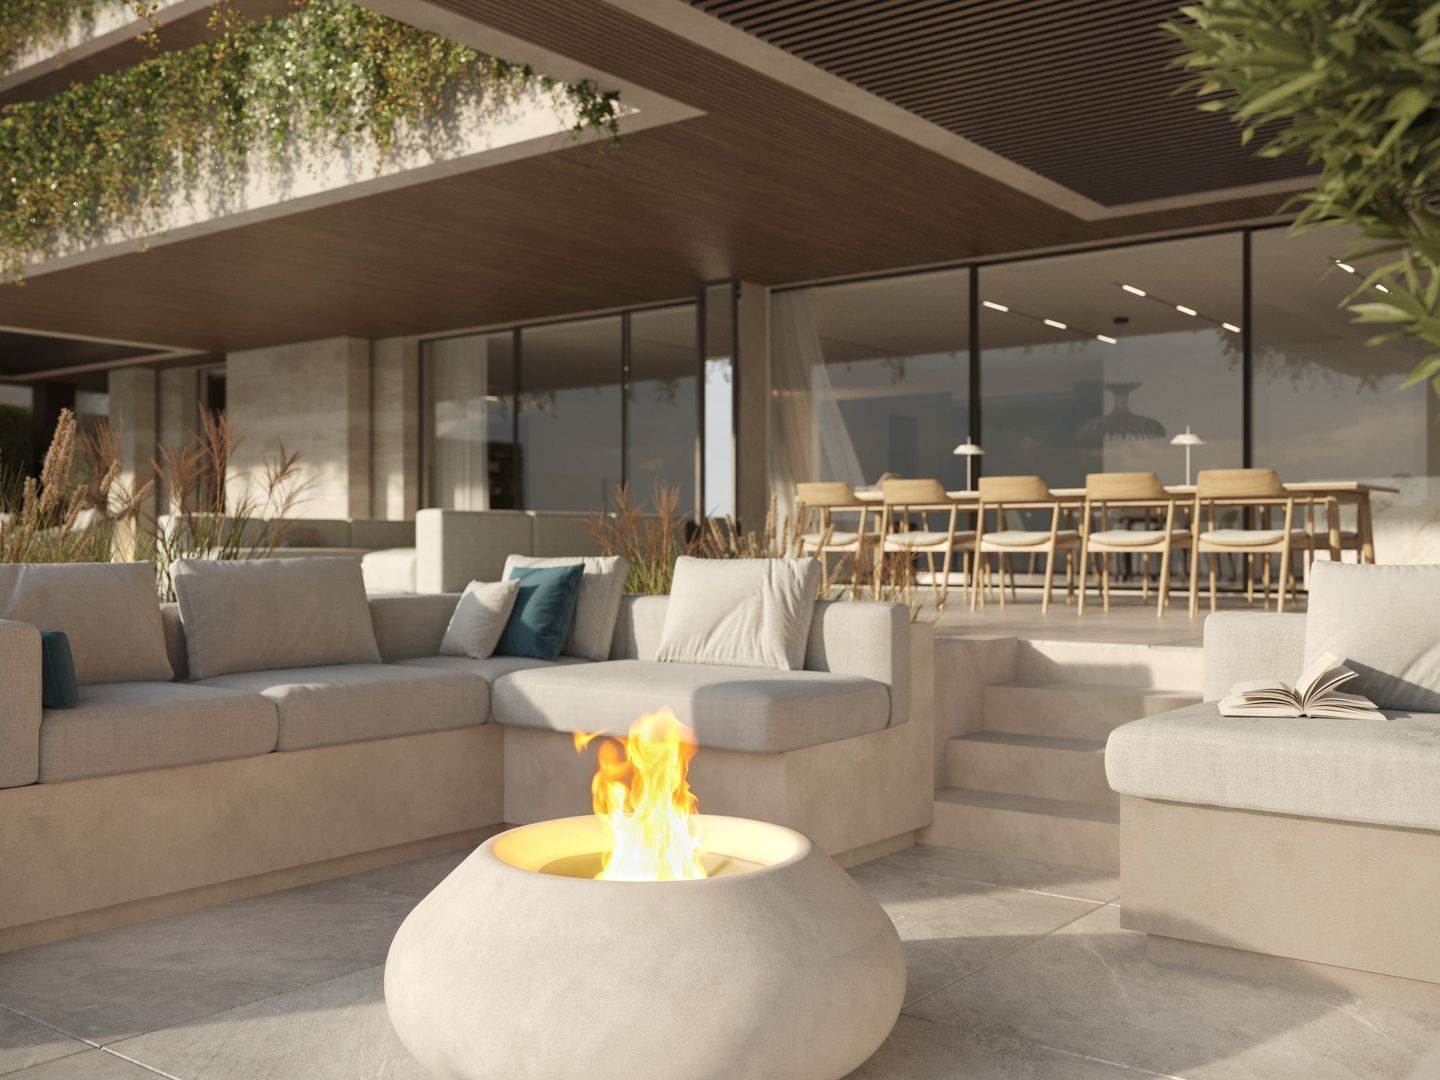 One of the most exciting property launches in Marbella, Benahavis foto-10